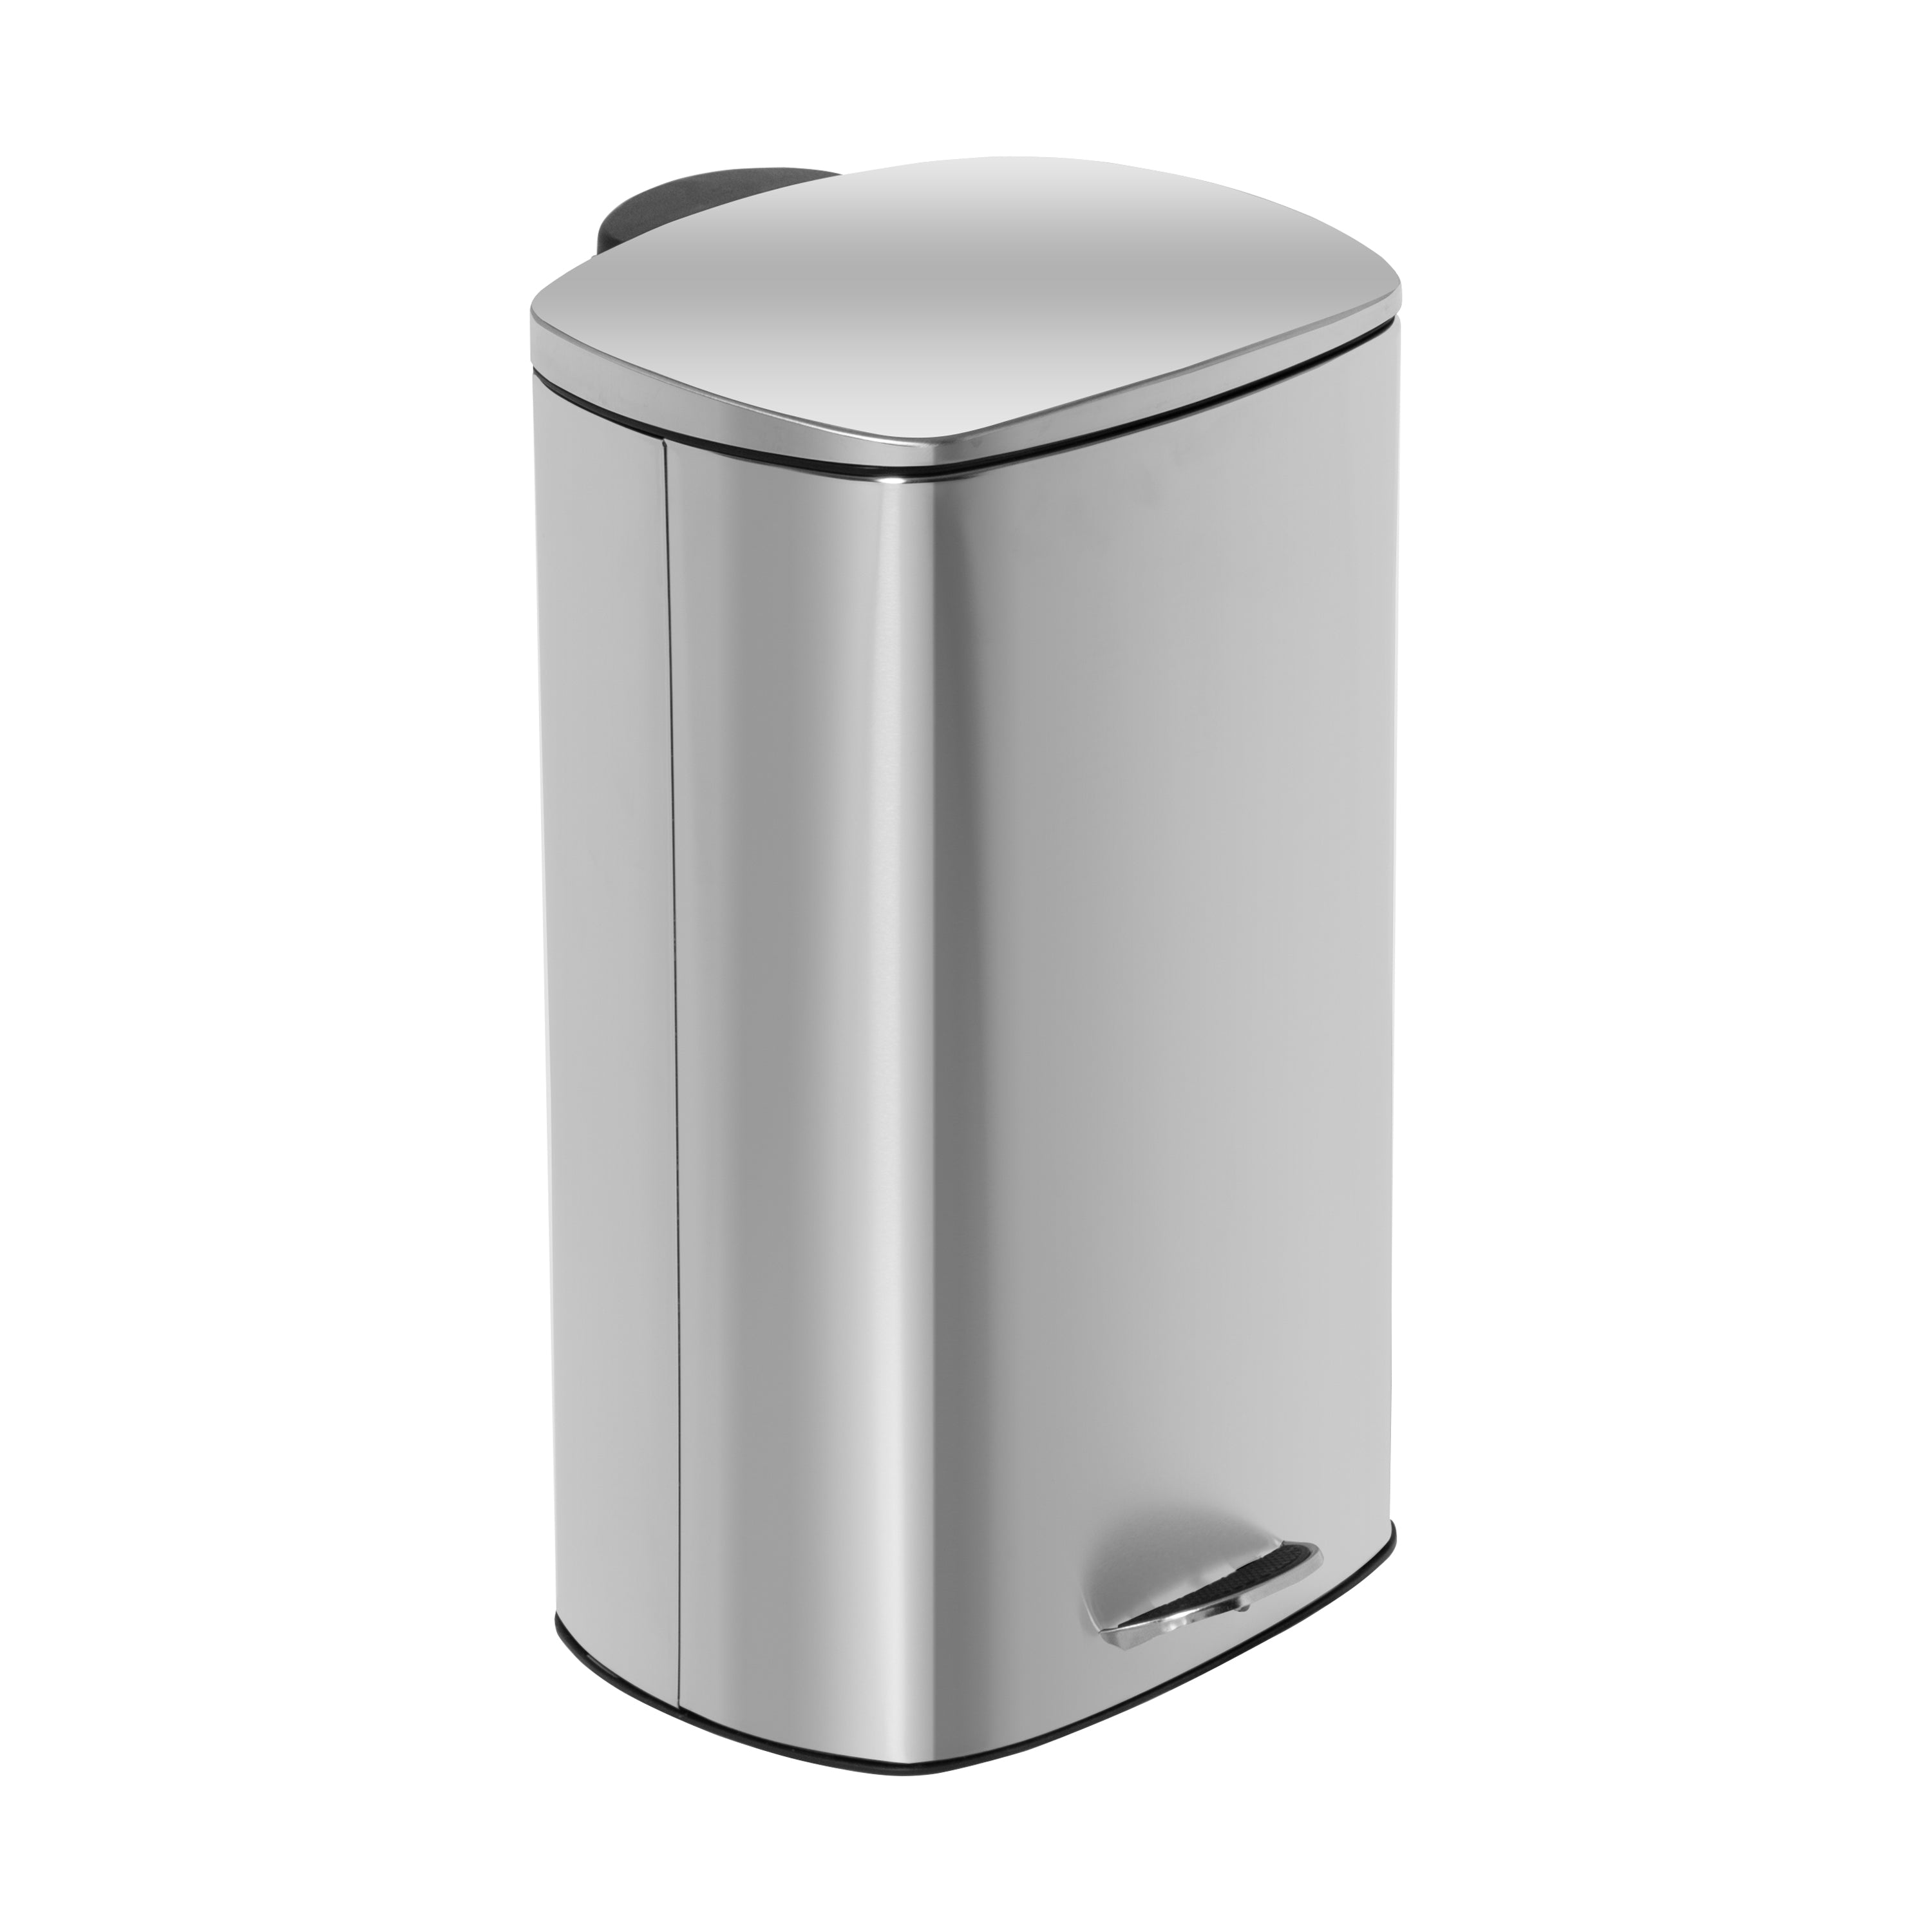 13 Gallon Step Trash Can/Waste Container, Pack of 3, Black or Silver